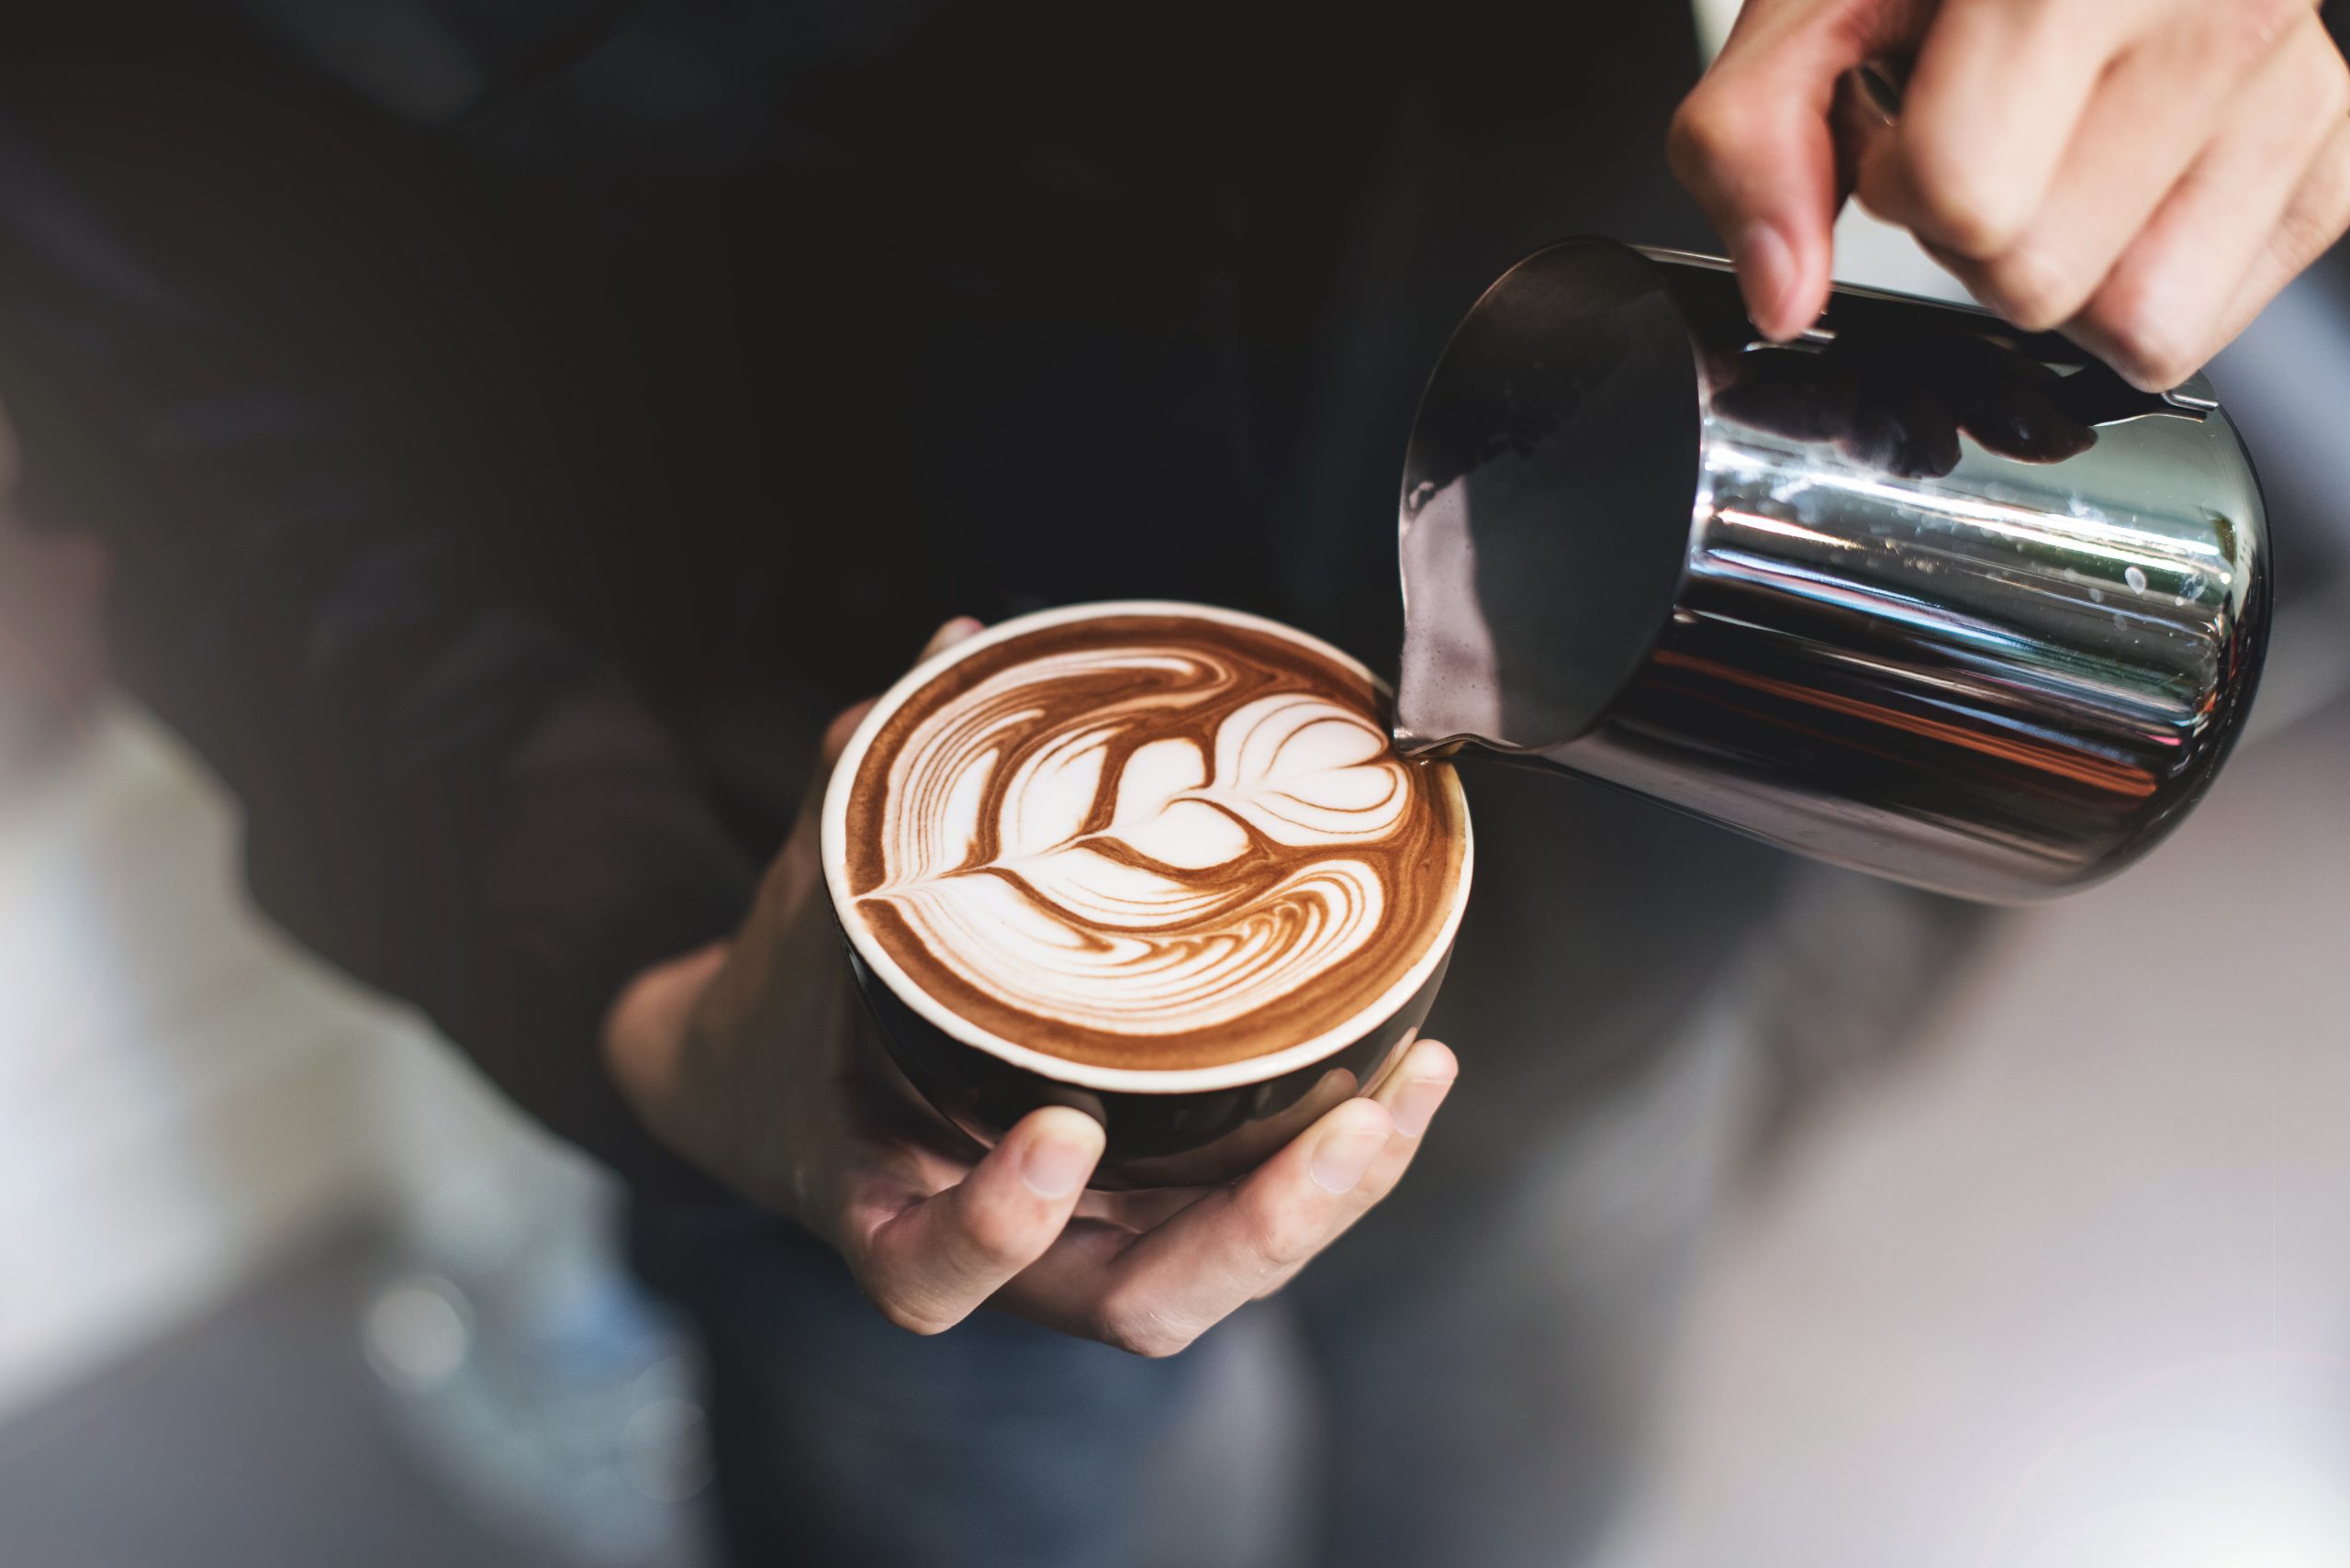 Businesses around the world are adopting fika, the Swedish practice of taking a group coffee break, to boost productivity and lower stress.